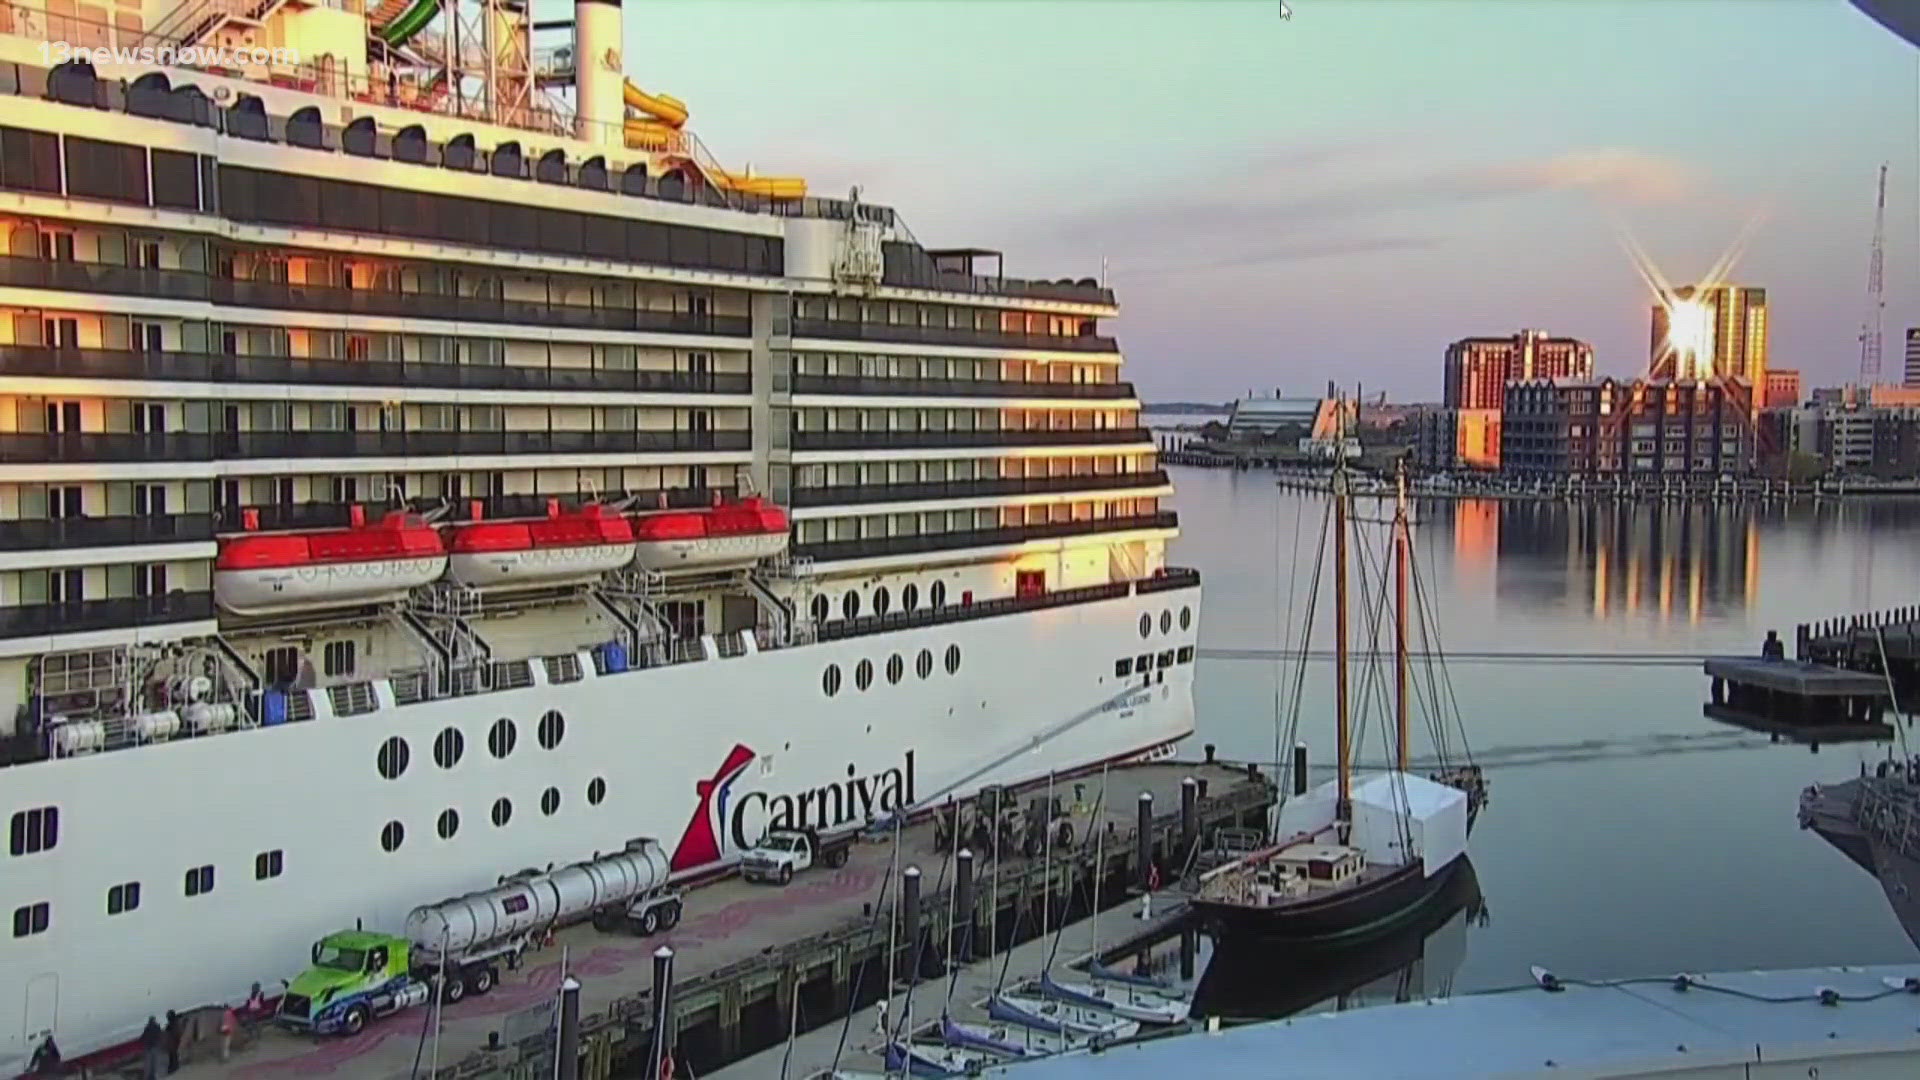 The Mermaid City welcomed a Carnival Cruise ship to port.